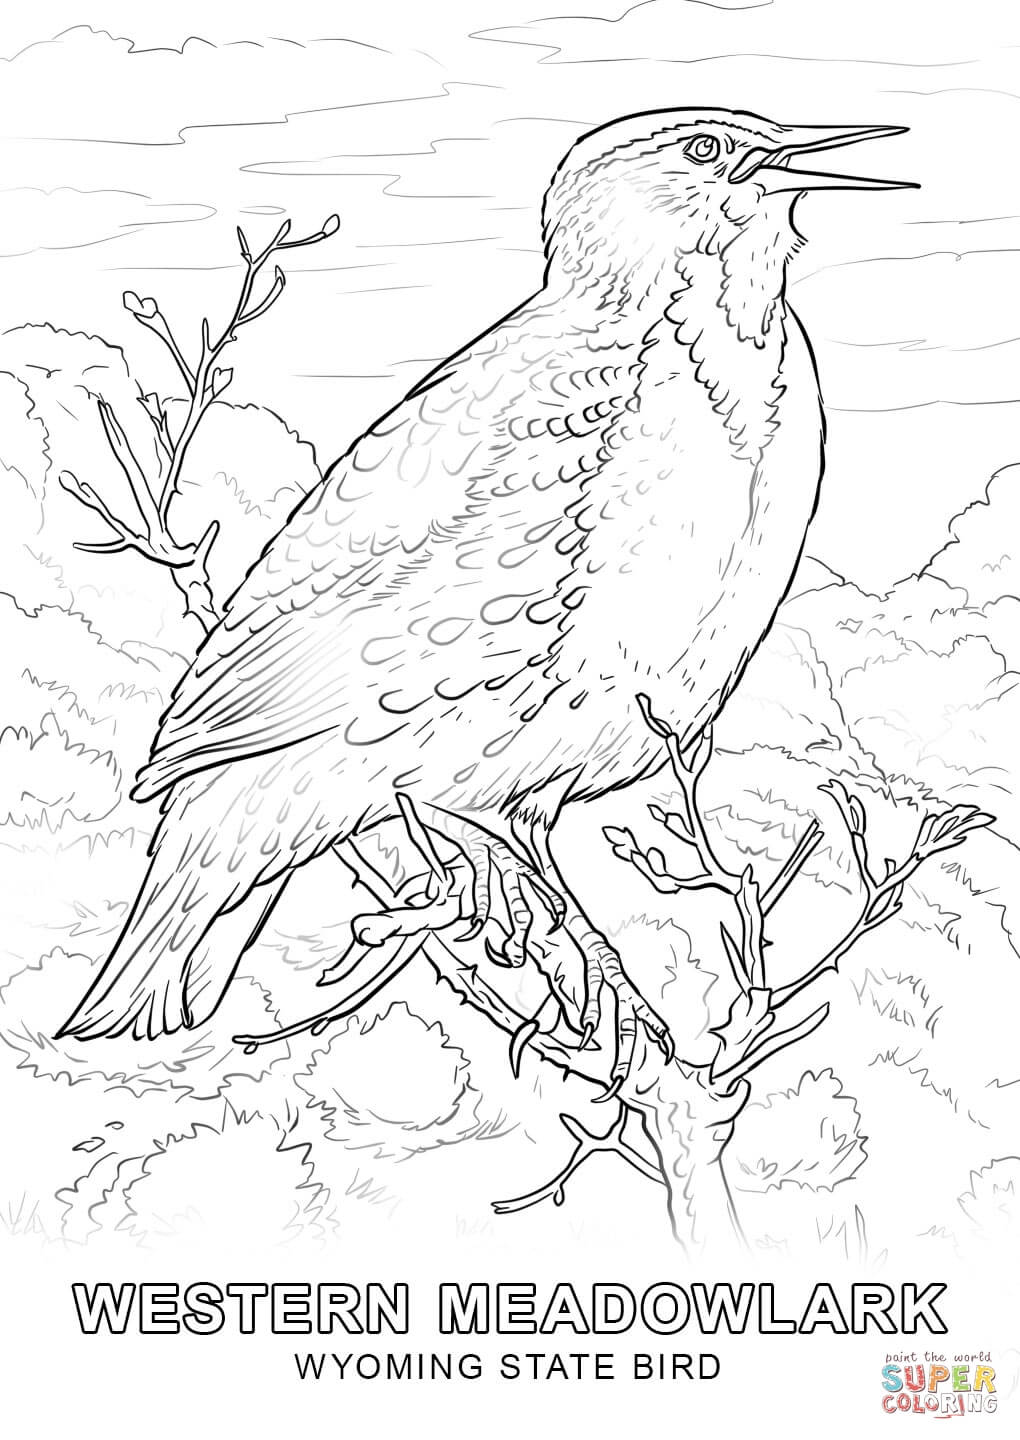 Wyoming State Bird coloring page | Free Printable Coloring Pages